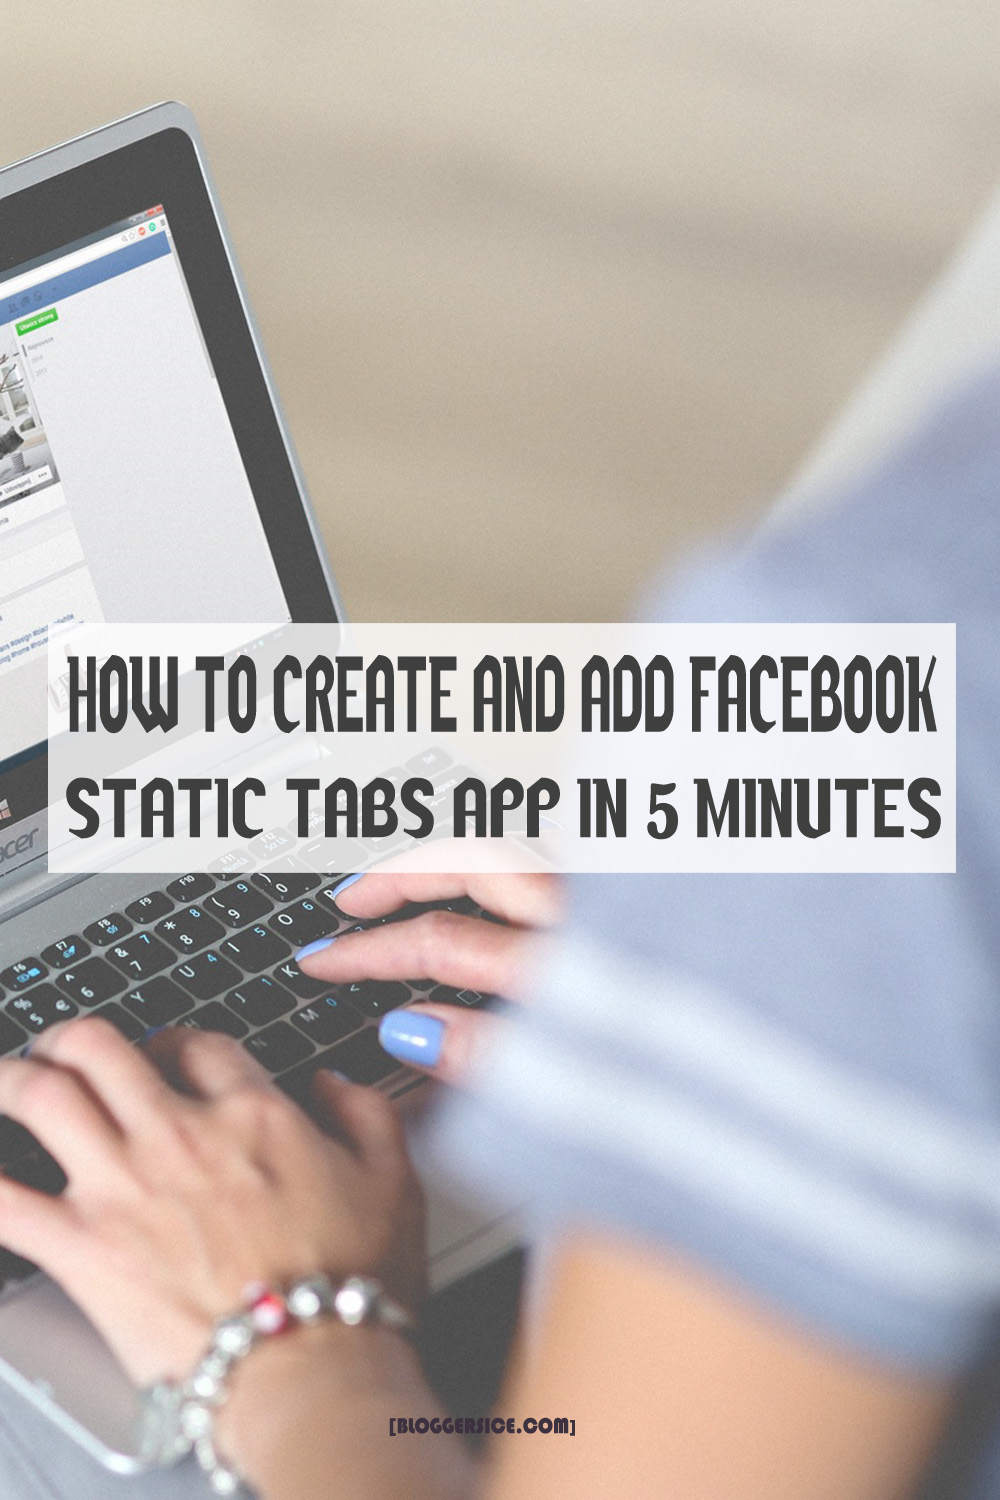 How to Create and Add Facebook Static Tabs App by Woobox in 5 Minutes?